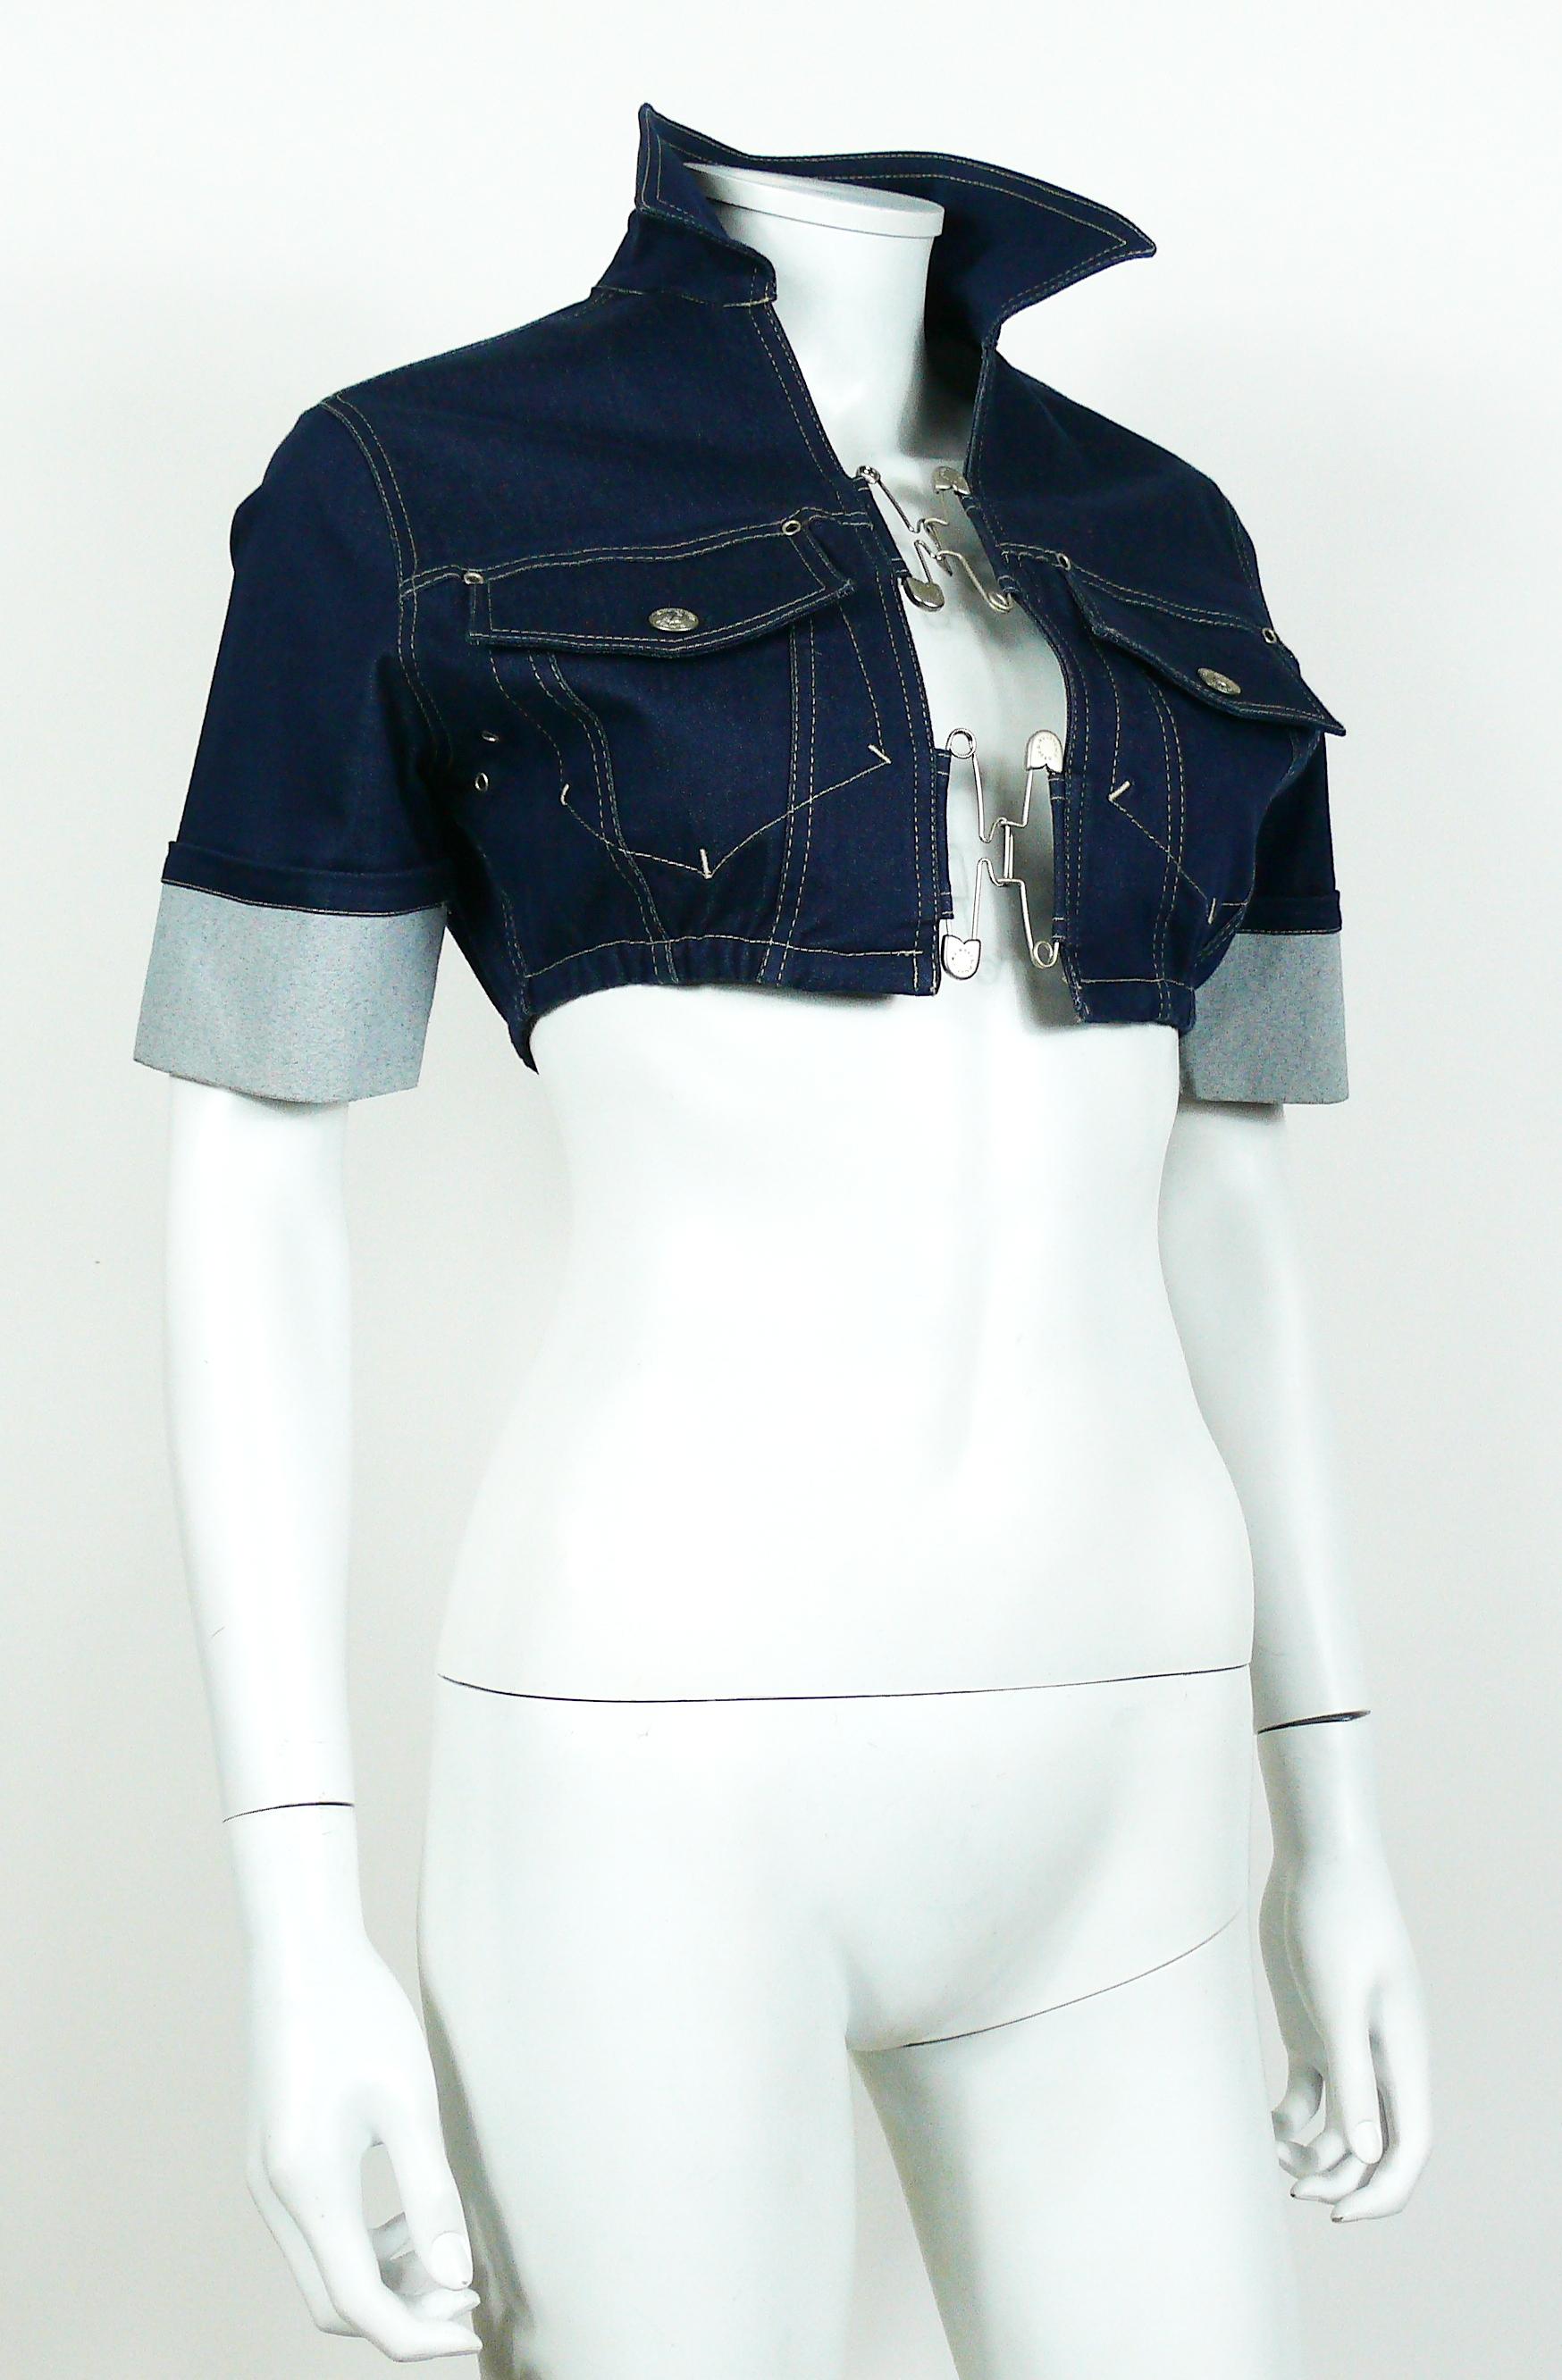 JEAN PAUL GAULTIER vintage denim crop top with interlocking safety pin closure at front.

This jacket features :
- Blue denim stretch fabric.
- Silver toned hardware.
- Large safety pins at front.
- Short sleeves.
- Classic collar.
- Two chest